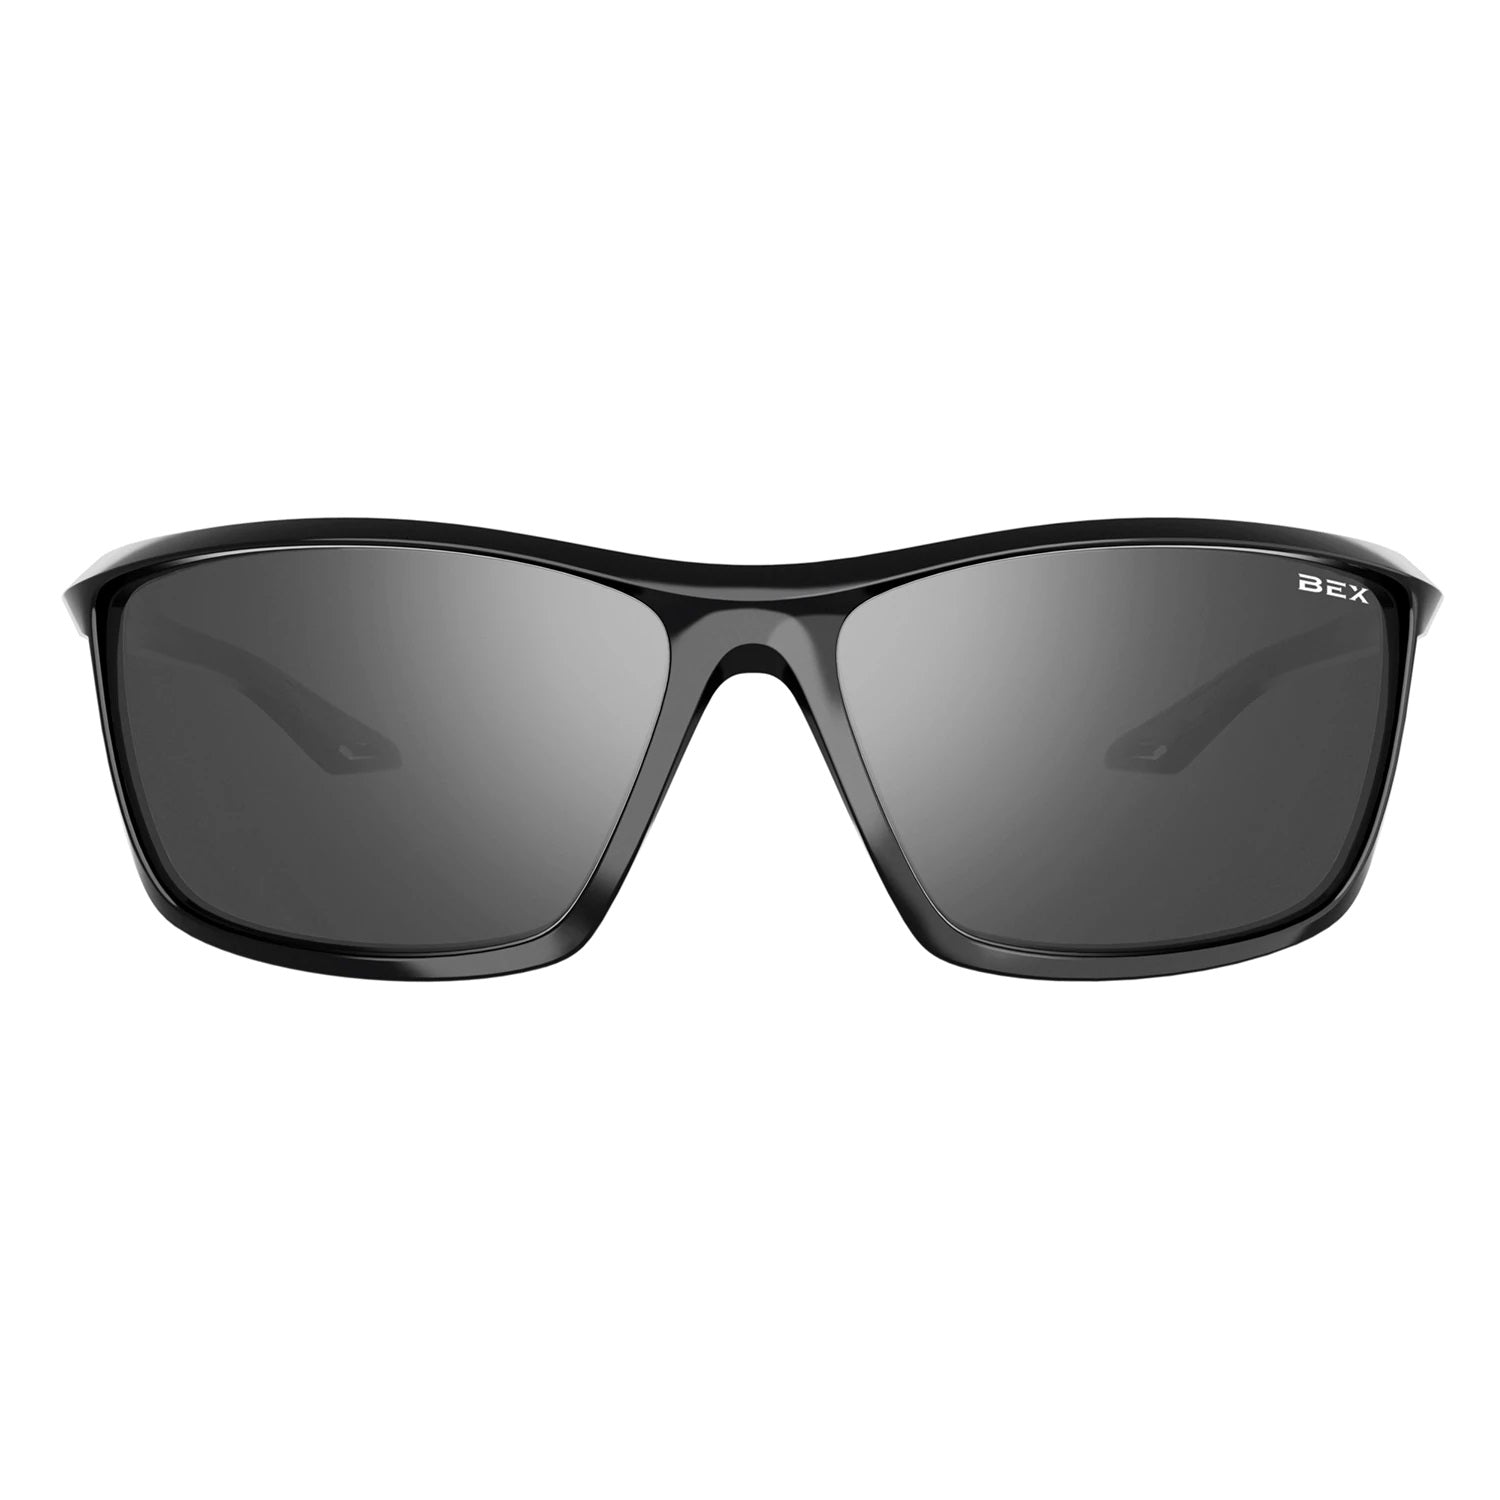 Sonar in Black/Silver view of front